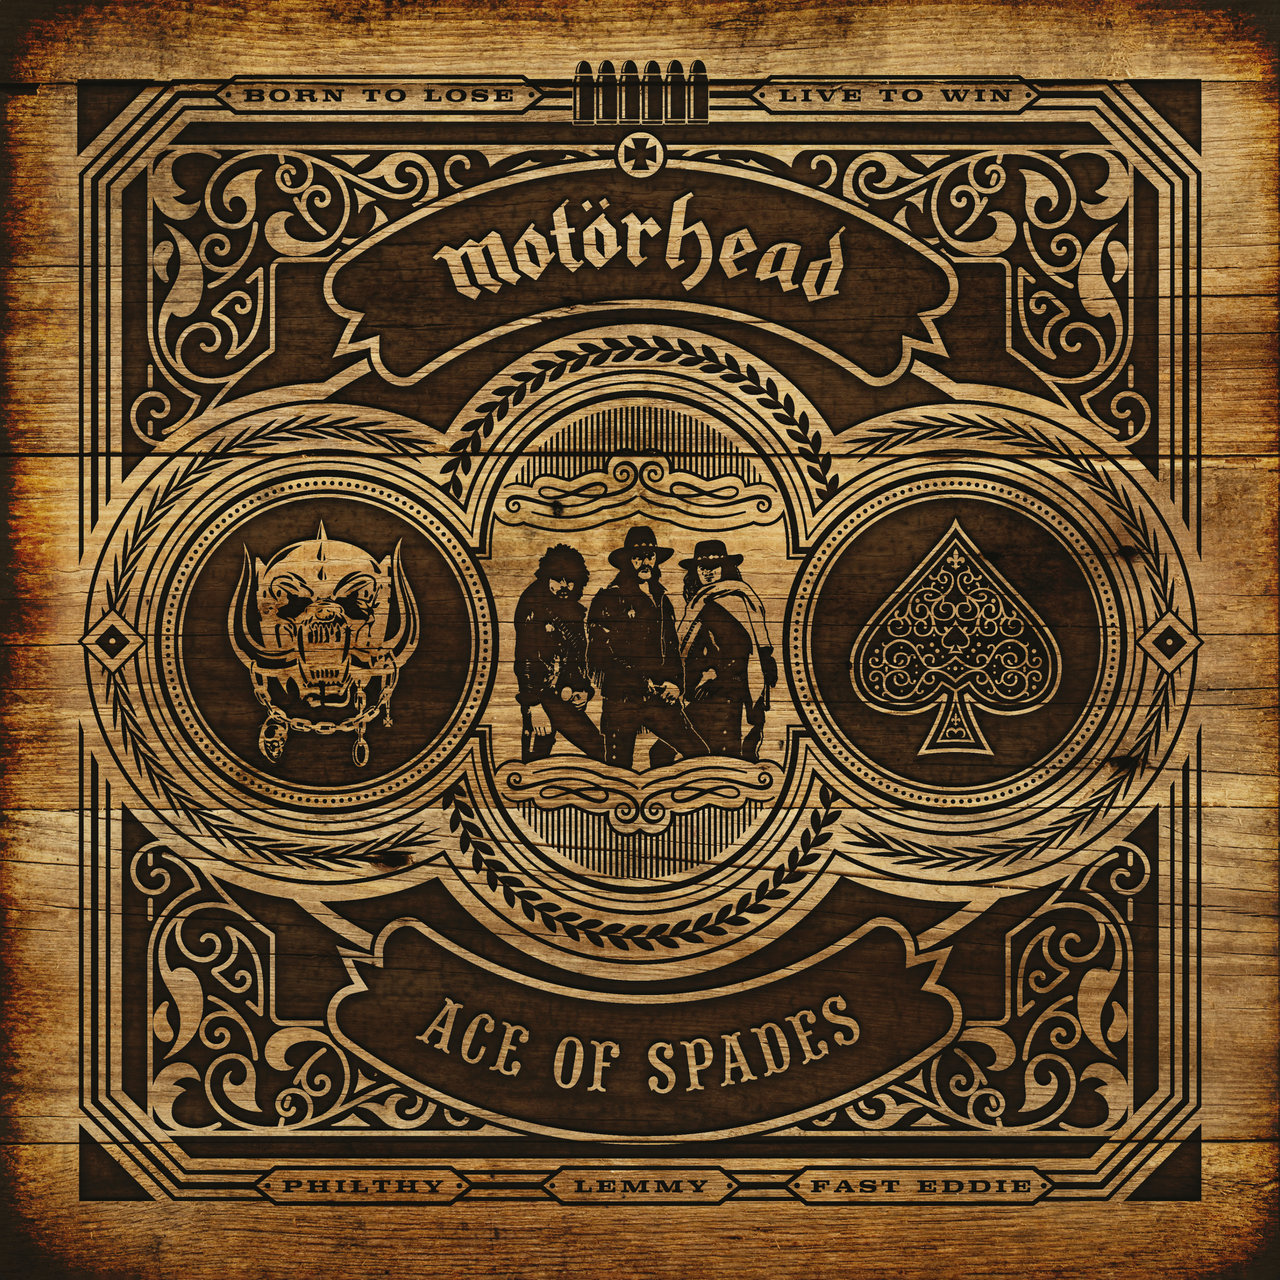 Motorhead – Ace of Spades (40th Anniversary Deluxe Edition) (2020) [FLAC 24bit/44,1kHz]